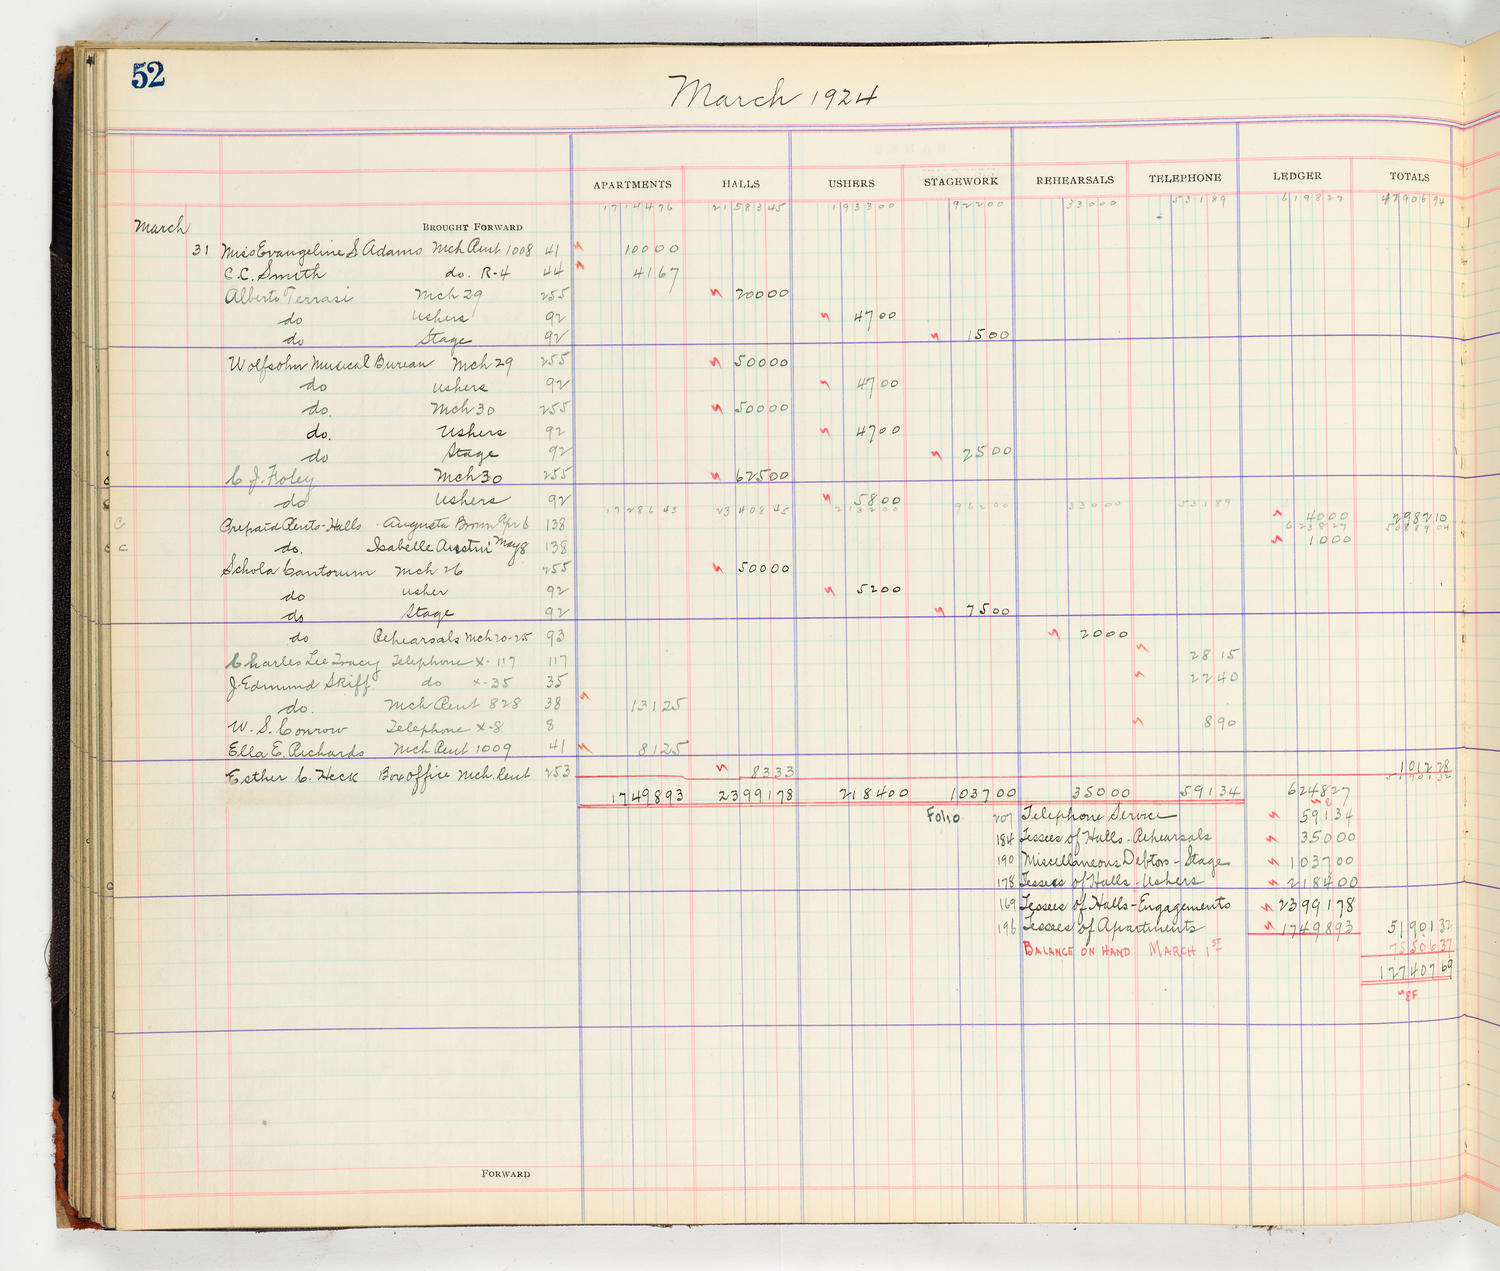 Music Hall Accounting Ledger Cash Book, volume 8, page 52a